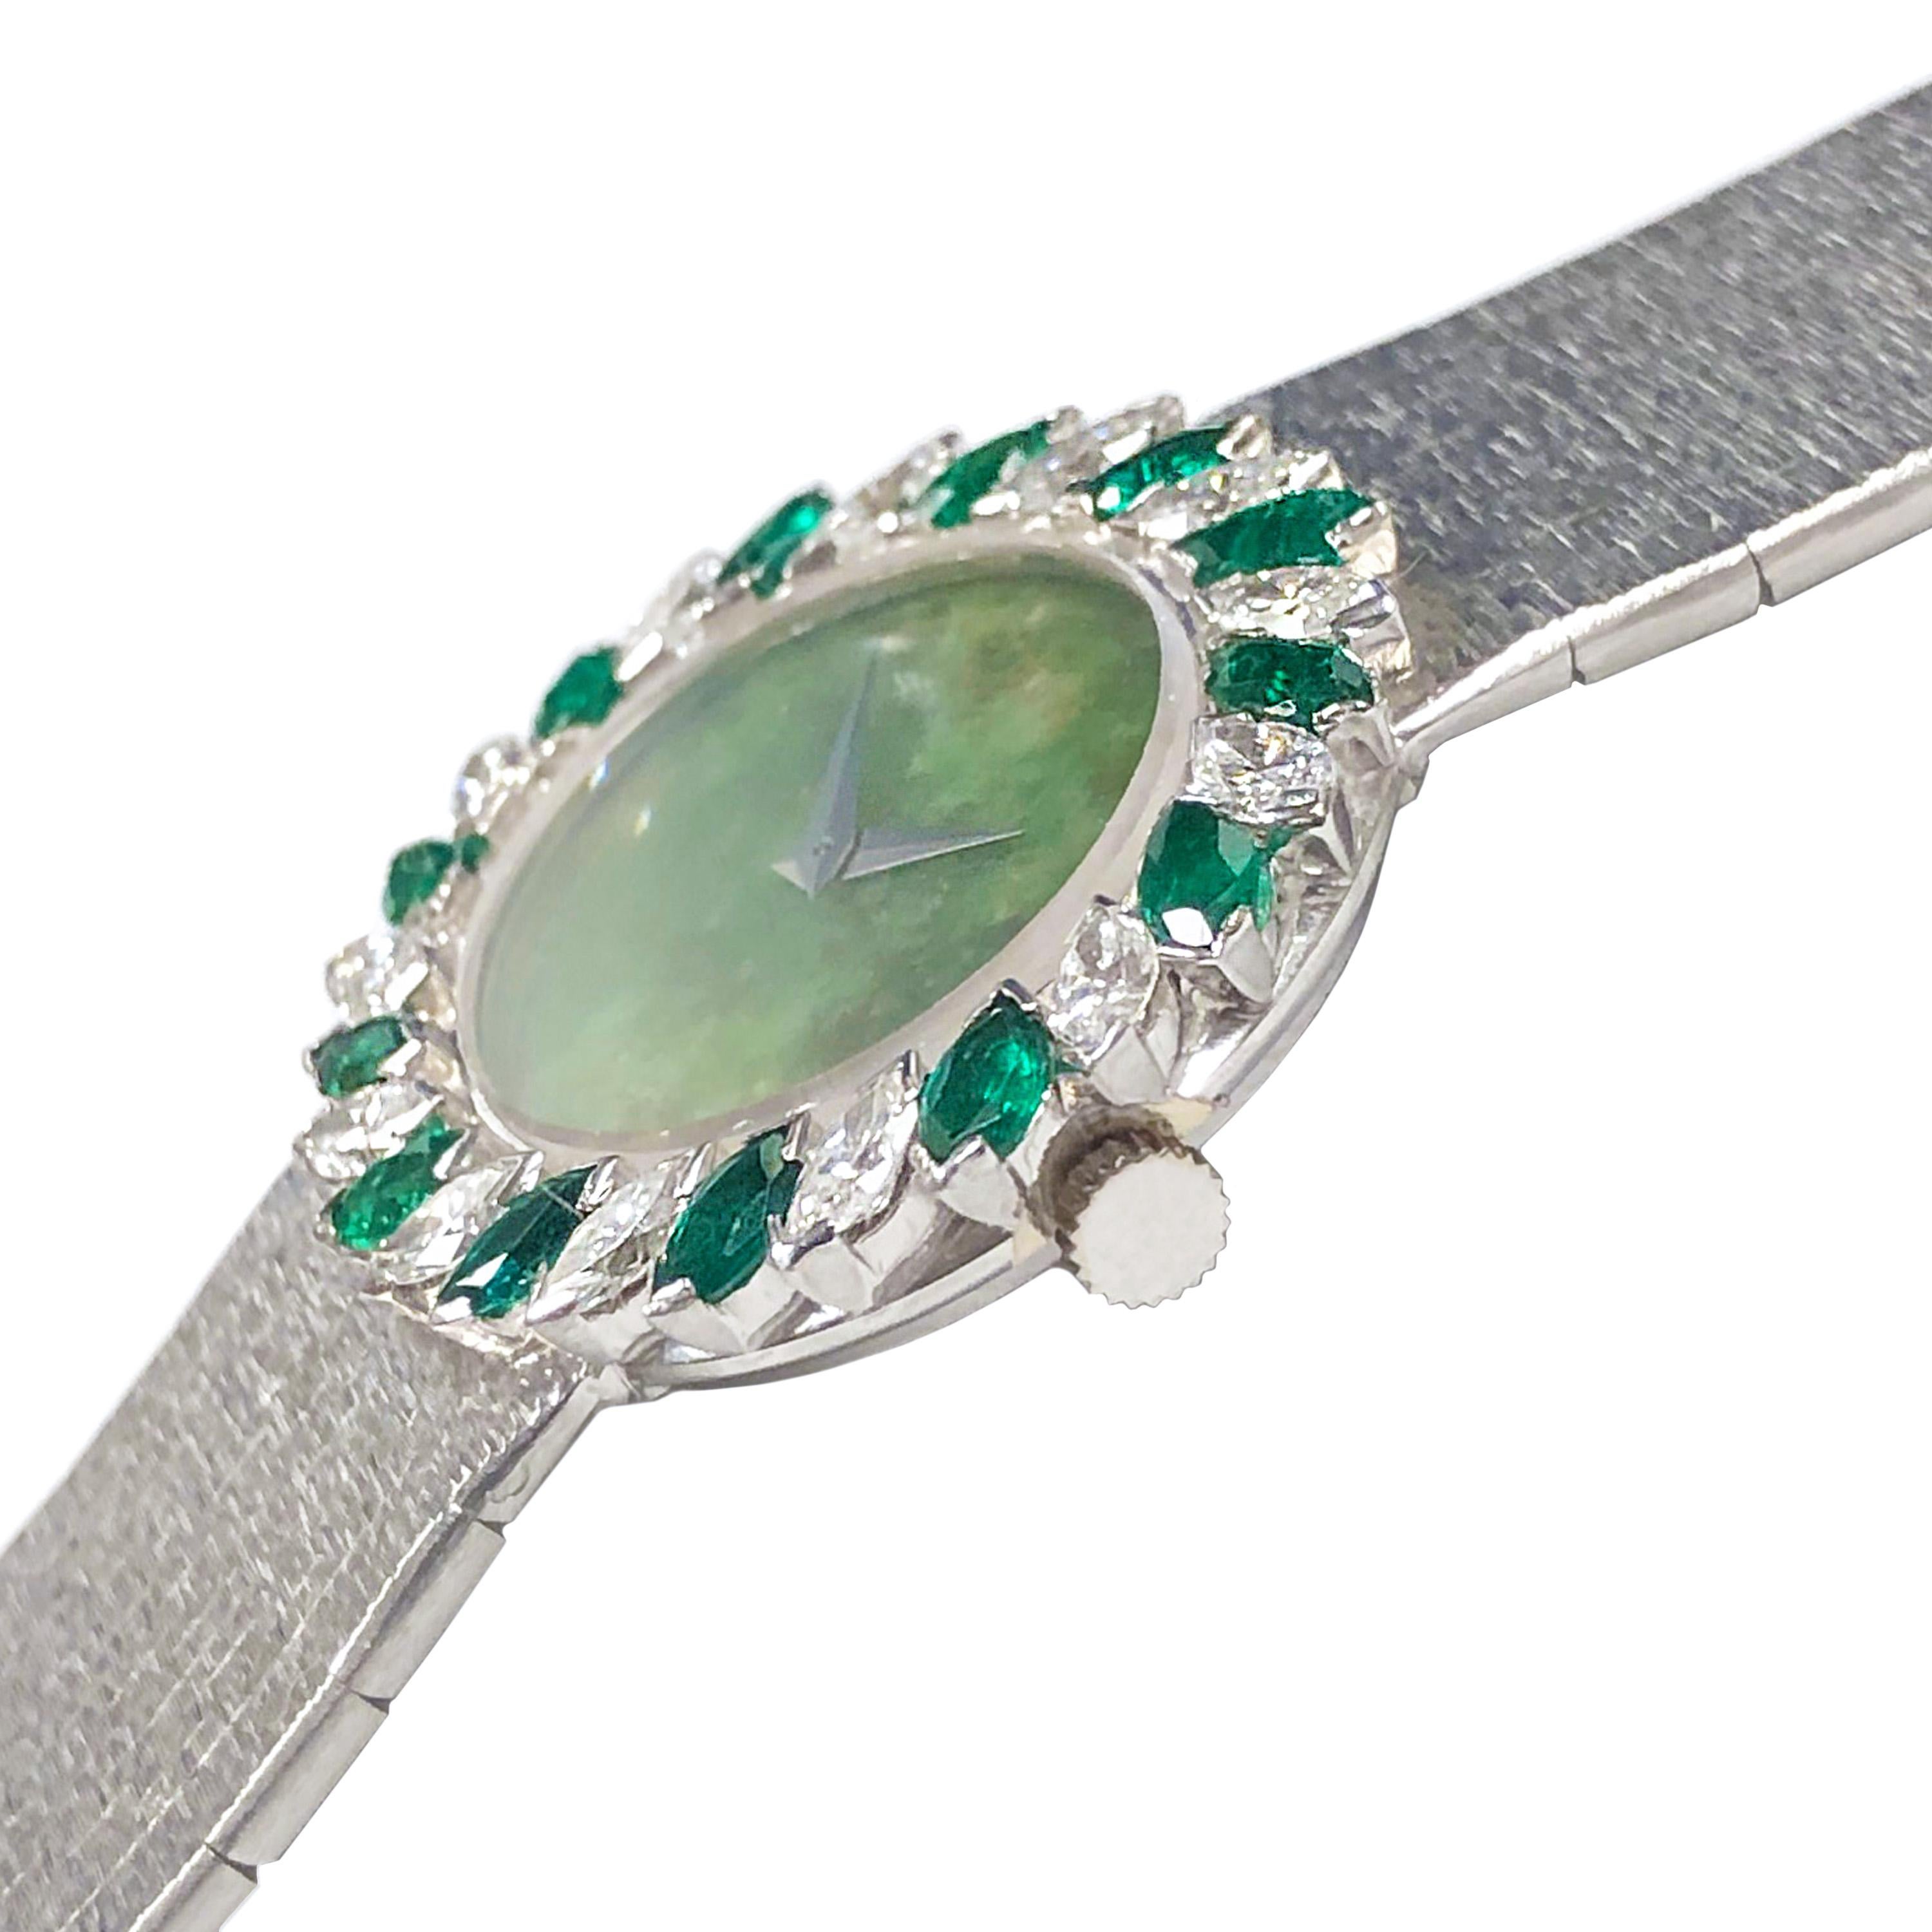 Circa 1980 Piaget Ladies Wrist Watch, 18K White Gold Case measuring 29 X 26 MM. Bezel set with Marquis Diamonds totaling 1.20 Carats and Marquis Emeralds of very fine color. 17 Jewel Mechanical, manual wind movement, Jade Dial. 5/8 inch wide